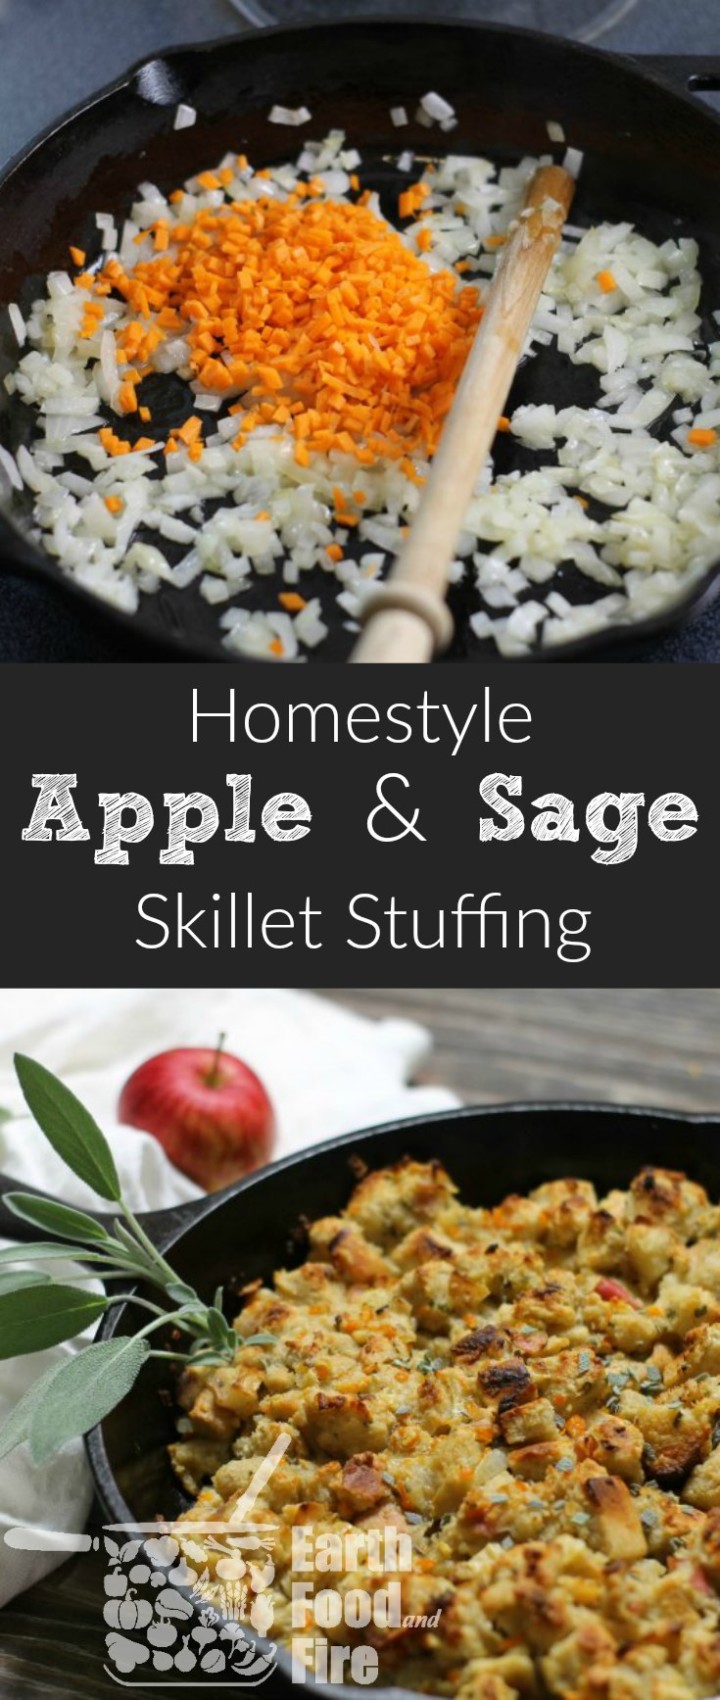 Easy to make, moist, and full of flavor, this apple and sage stuffing cooked in a cast iron skillet will become your new favorite dressing recipe! #skillet #stuffing #dressing #thanksgiving #apple